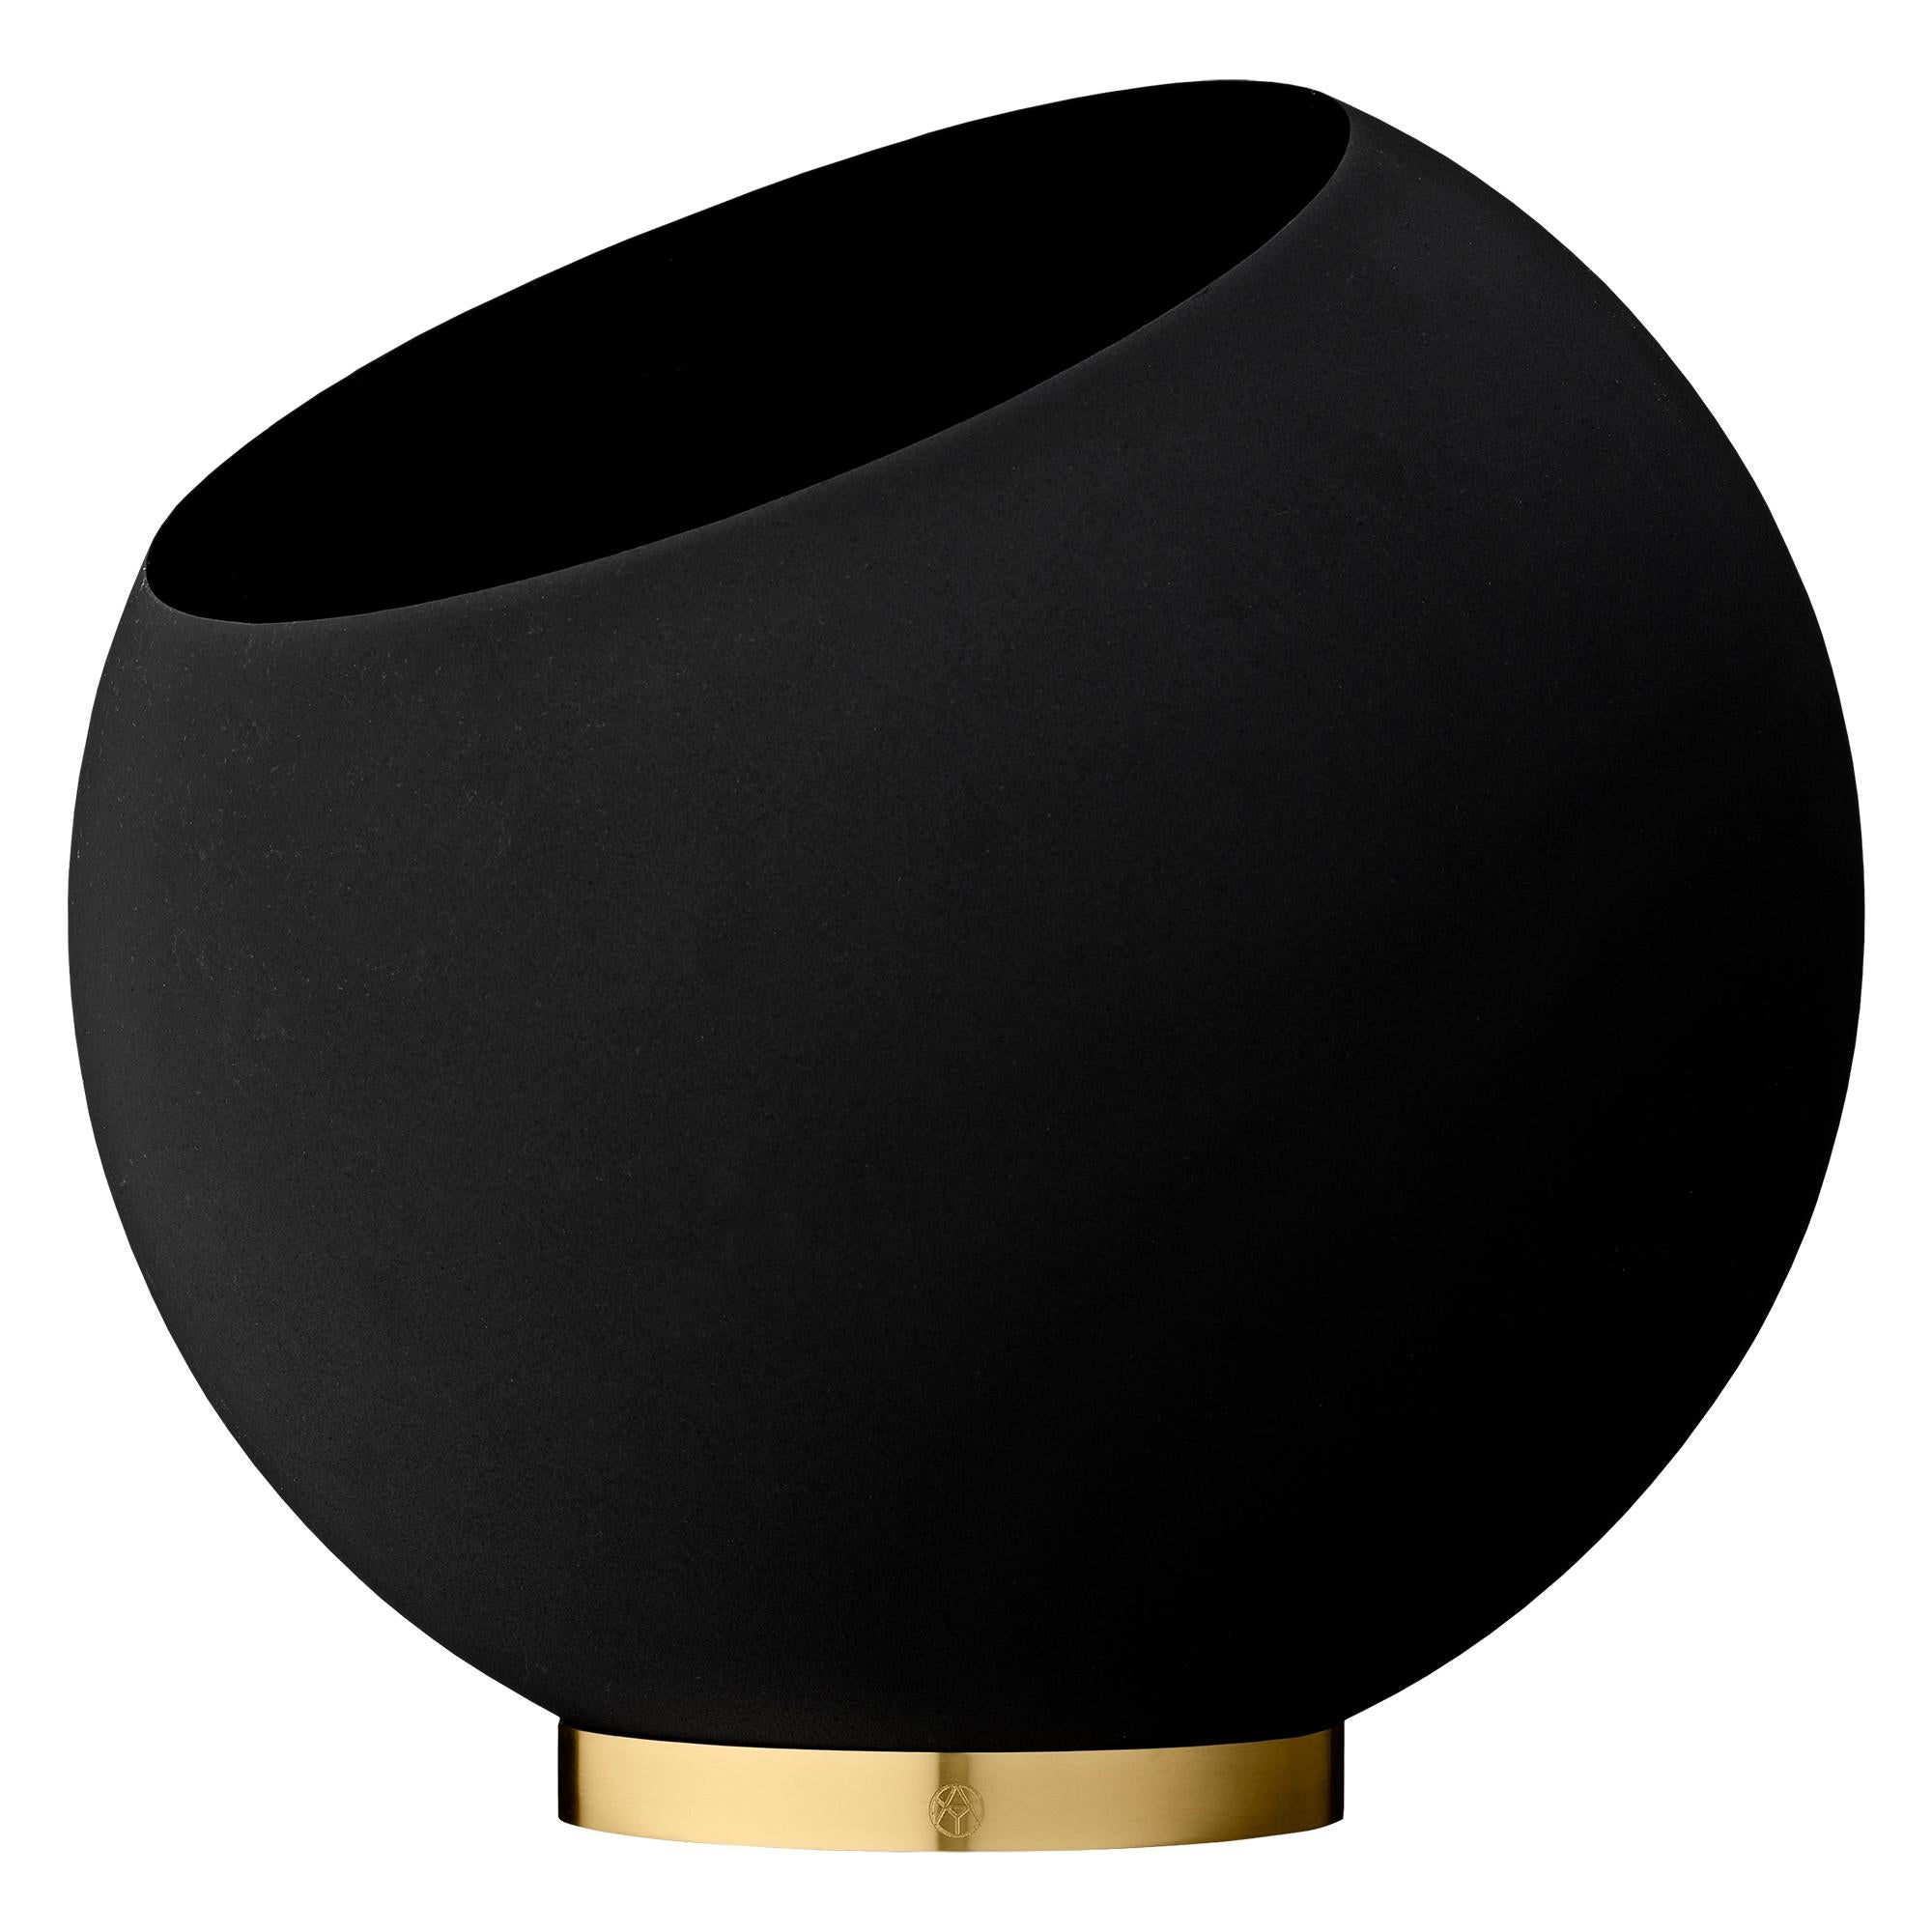 Extra large black Minimalist flower pot
Dimensions: Diameter 60 x height 50 cm
Materials: Matte-coated steel and polished iron.
Also available in bordeaux and in sizes small and medium and large.

A very popular design has been renewed and